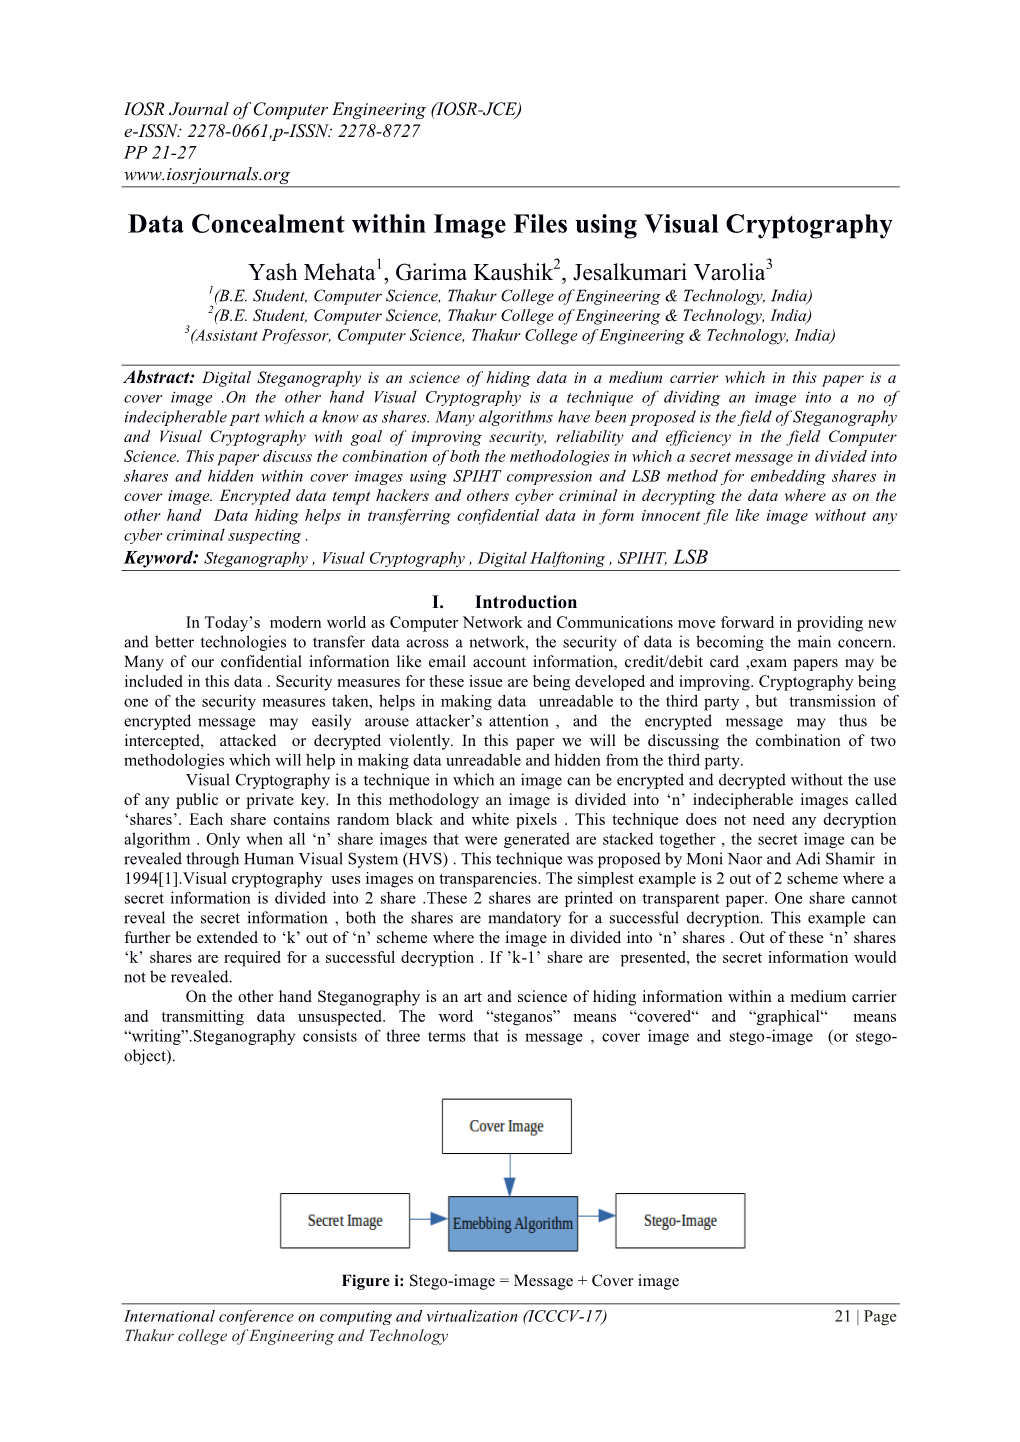 Data Concealment Within Image Files Using Visual Cryptography